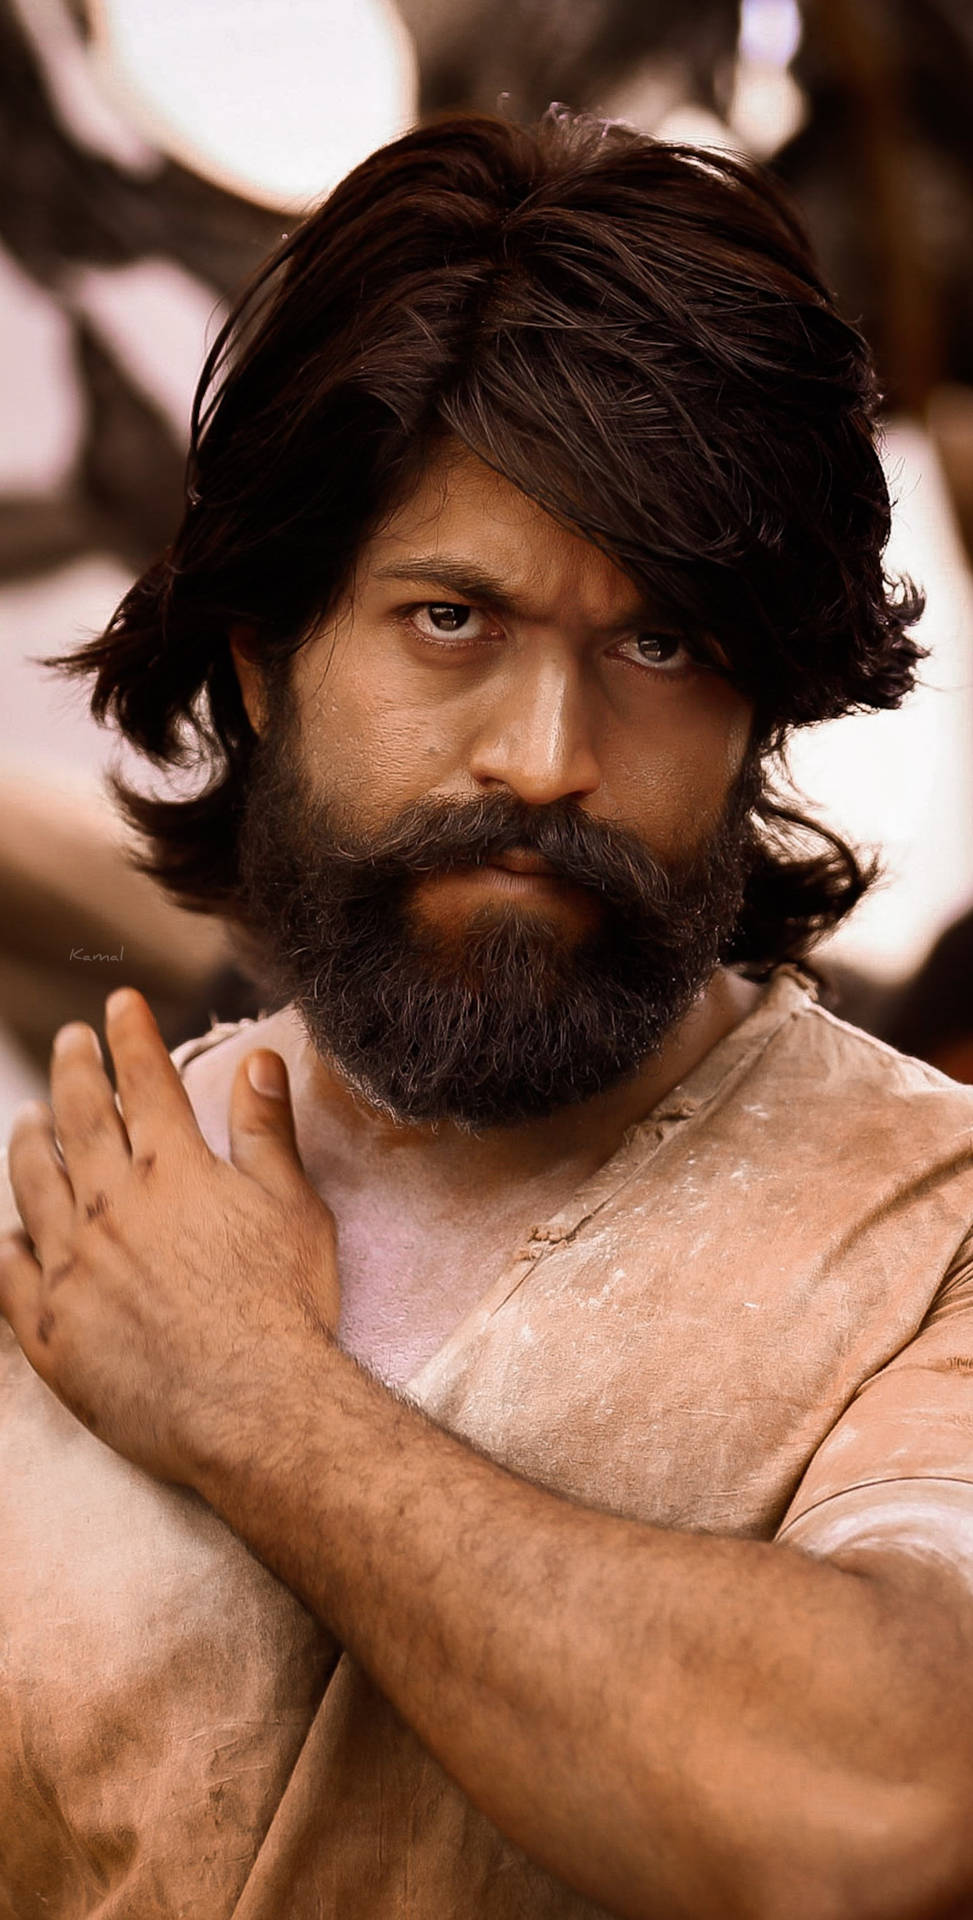 Yash, The Star Of Kgf, In Intense Focus